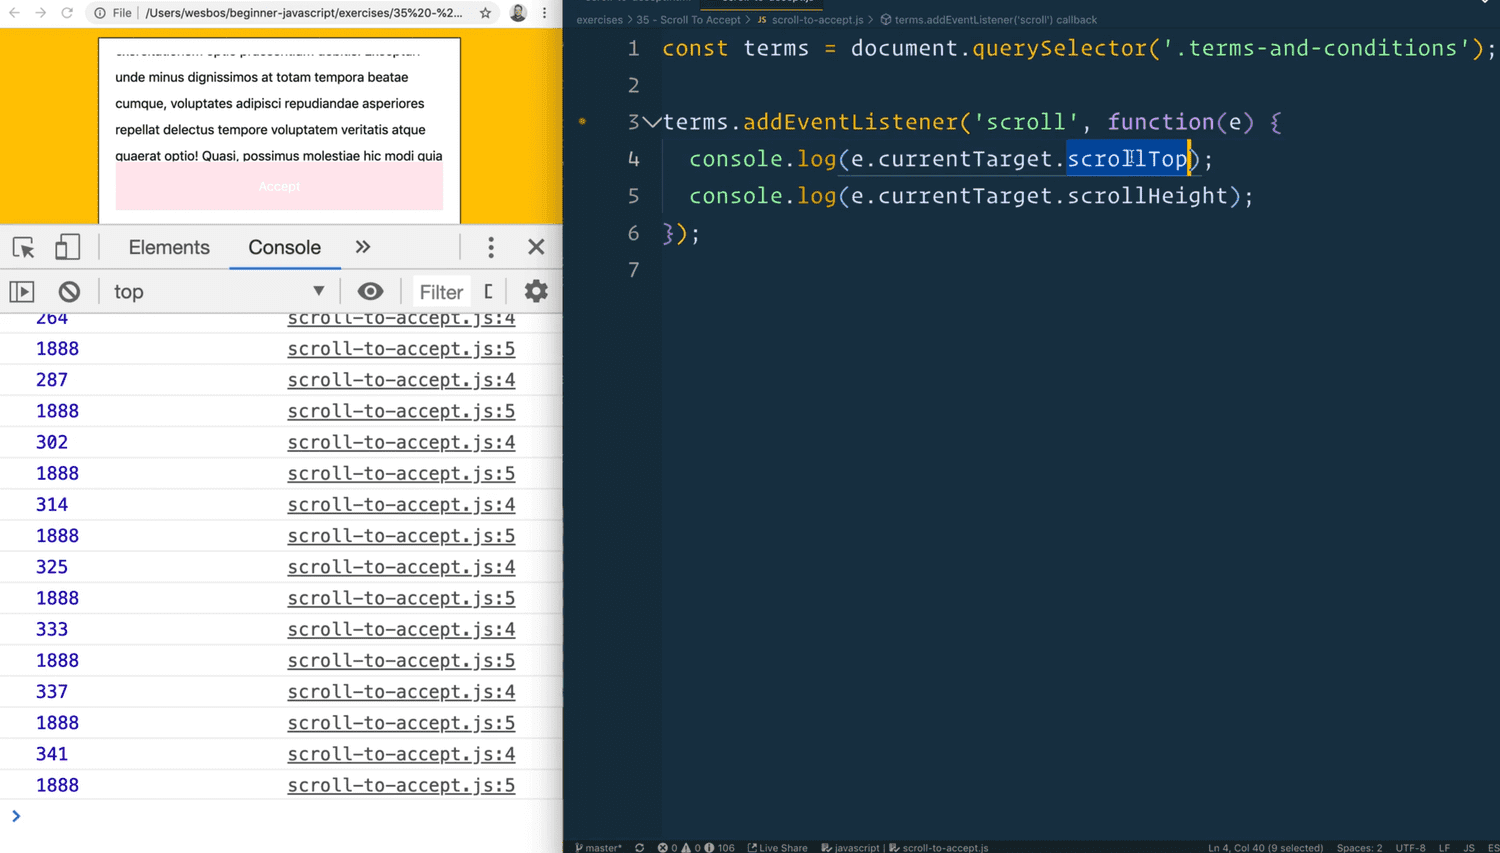 screenshot with console showing logs from scroll handler and editor showing code